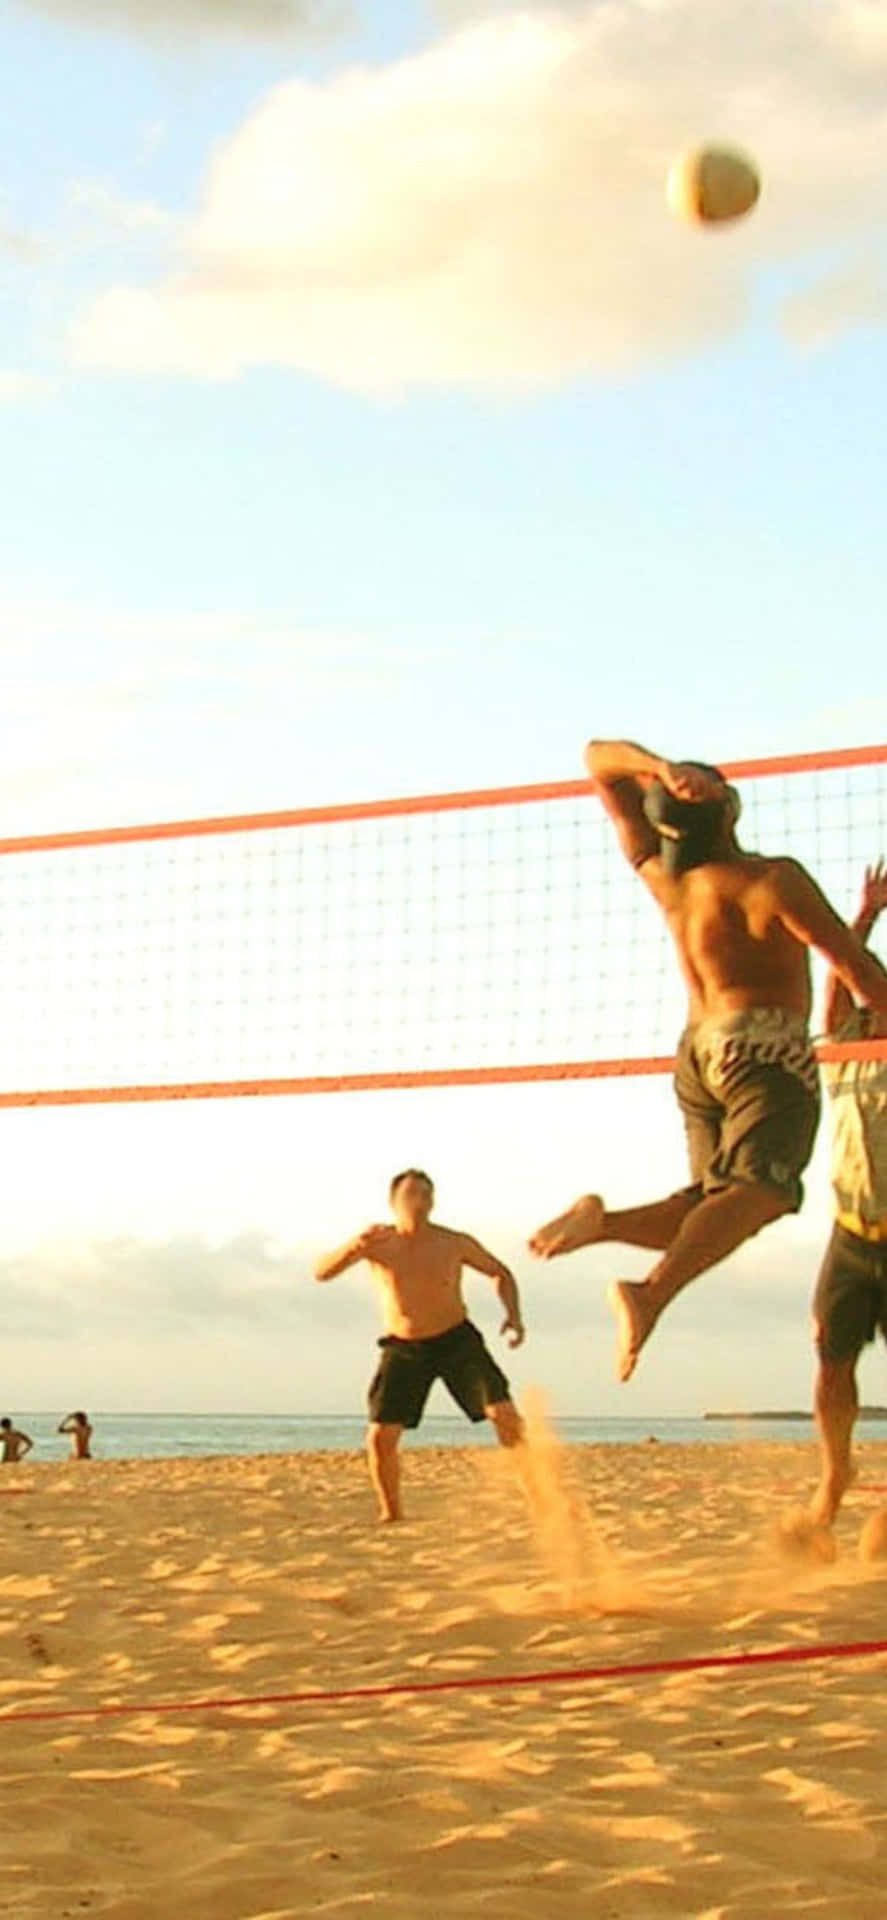 A Group Of People Playing Volleyball